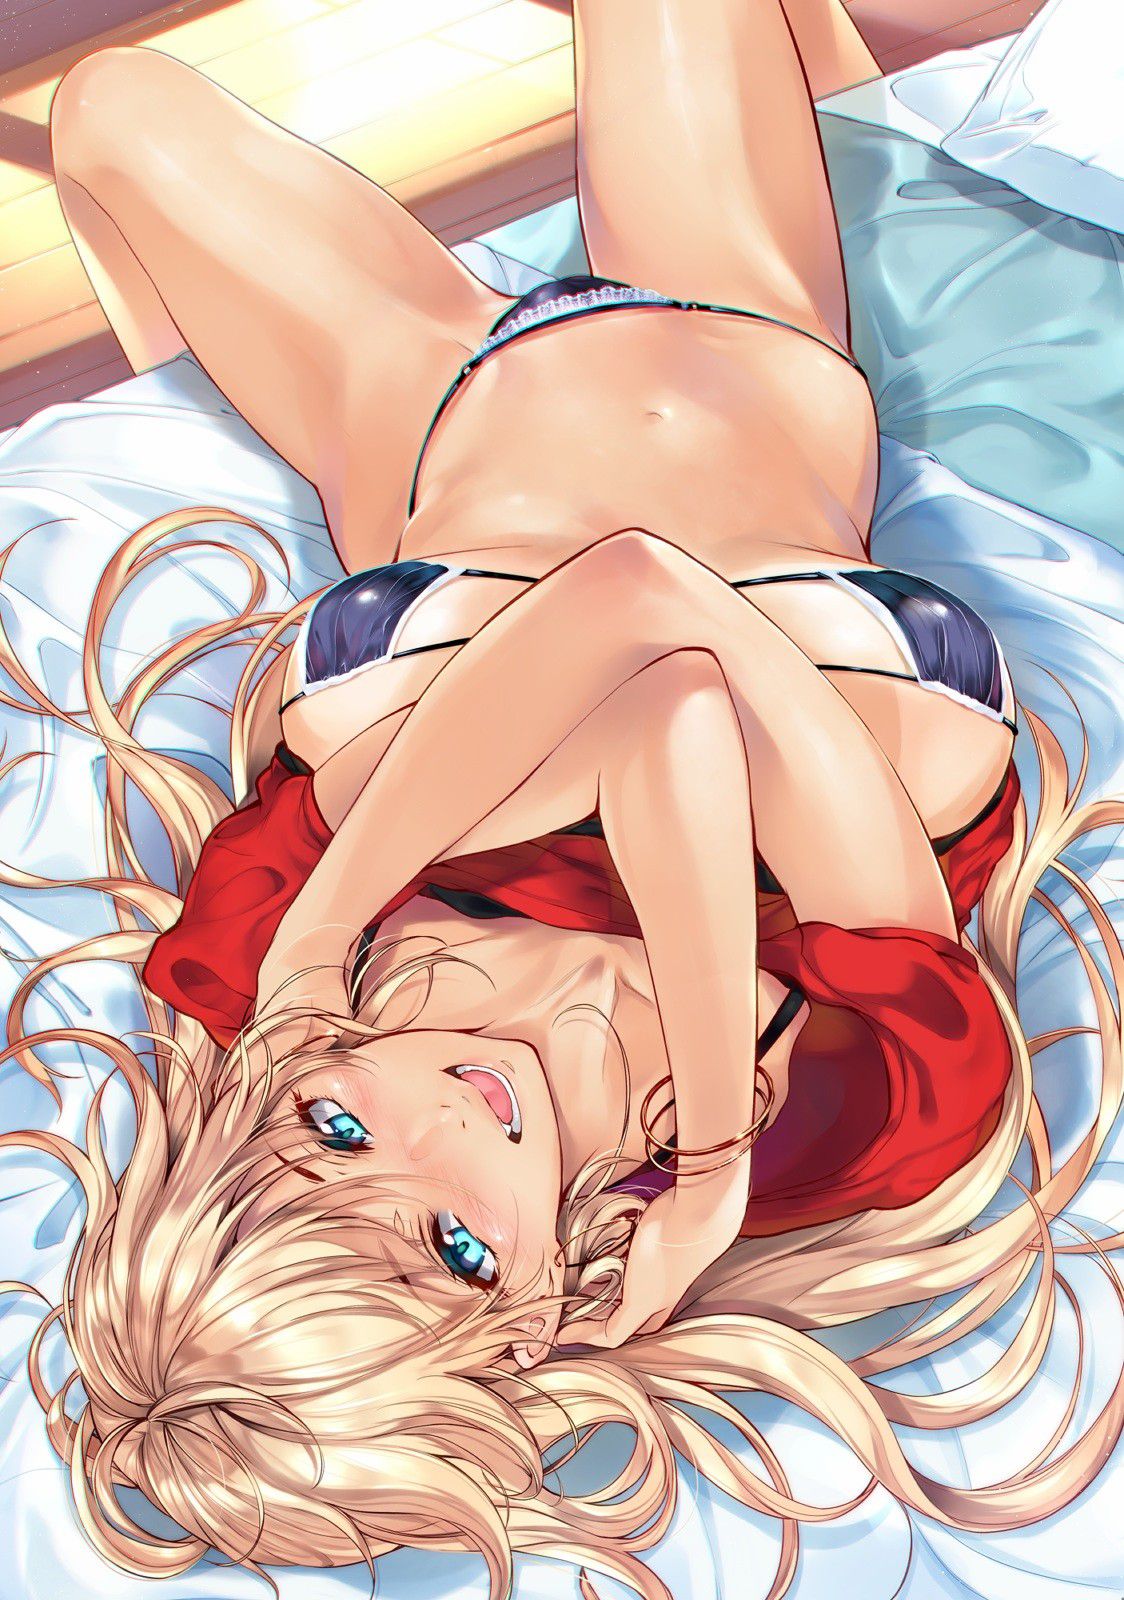 Erotic anime summary erotic images of gals who absolutely love sex [secondary erotic] 5